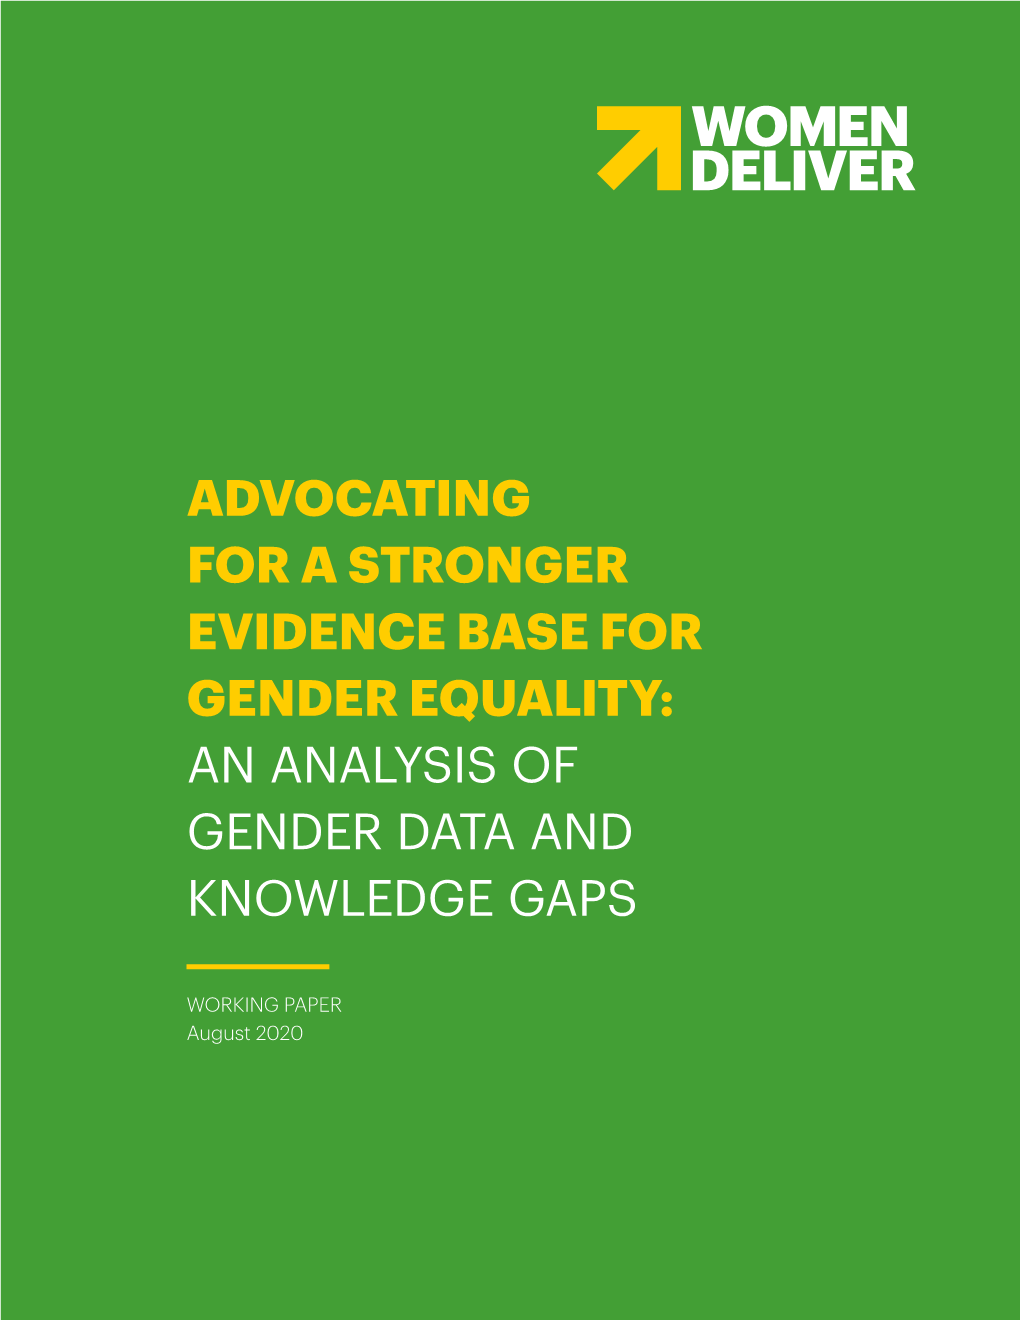 An Analysis of Gender Data and Knowledge Gaps